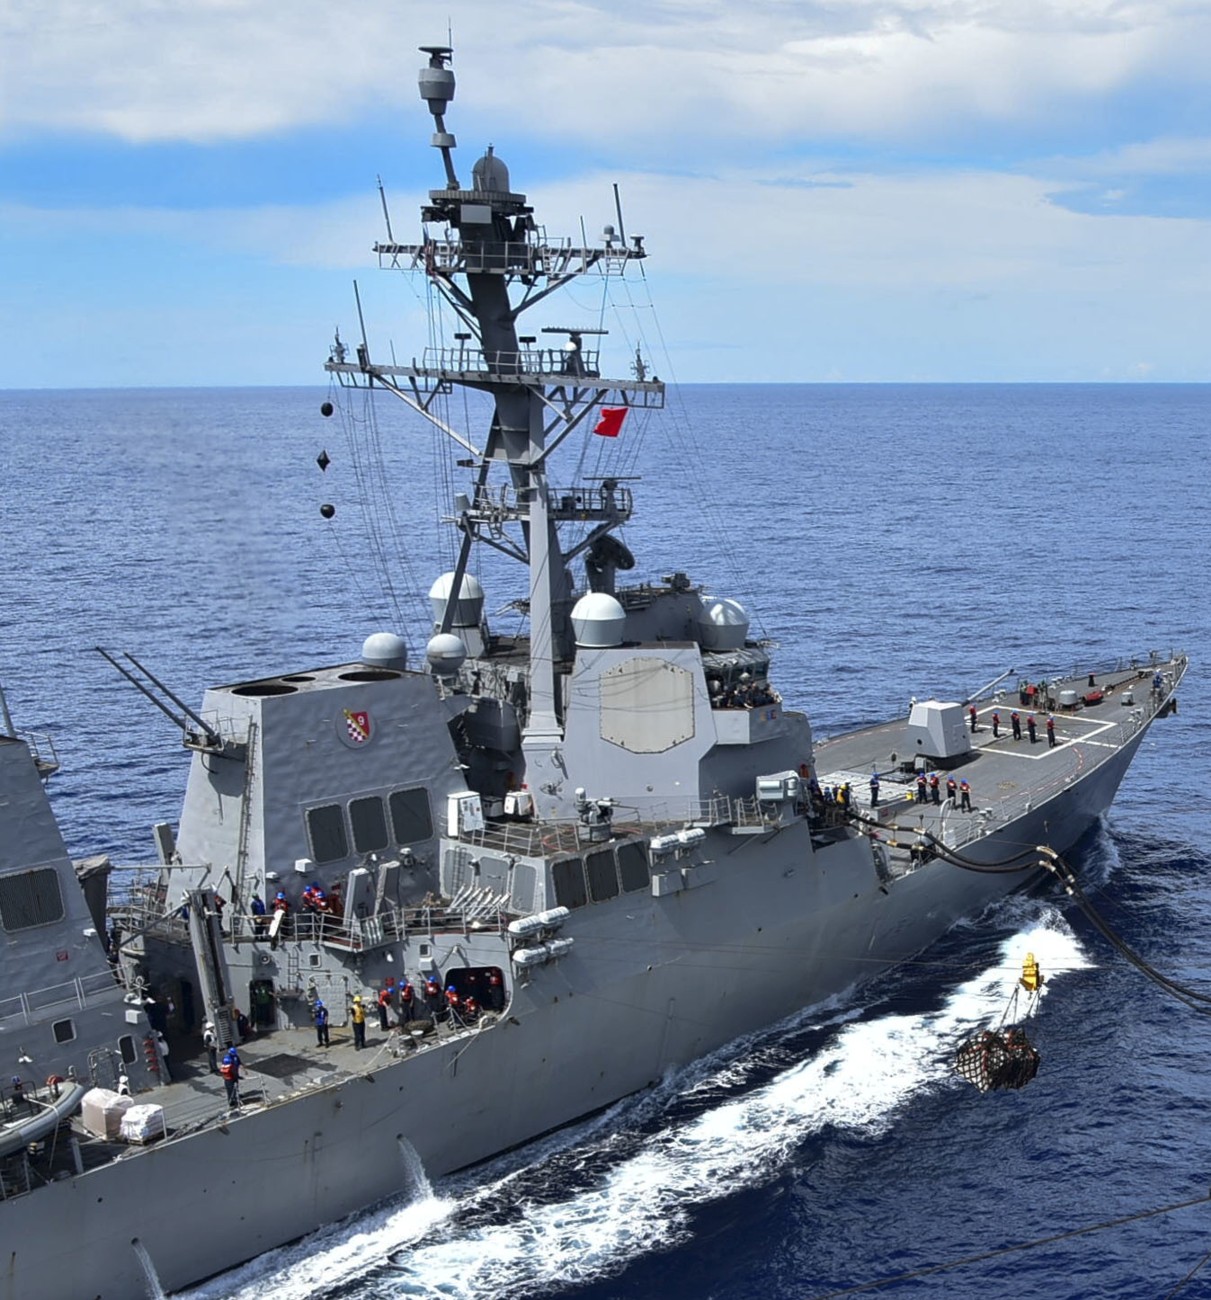 ddg-114 uss ralph johnson arleigh burke class guided missile destroyer us navy aegis 35 south china sea